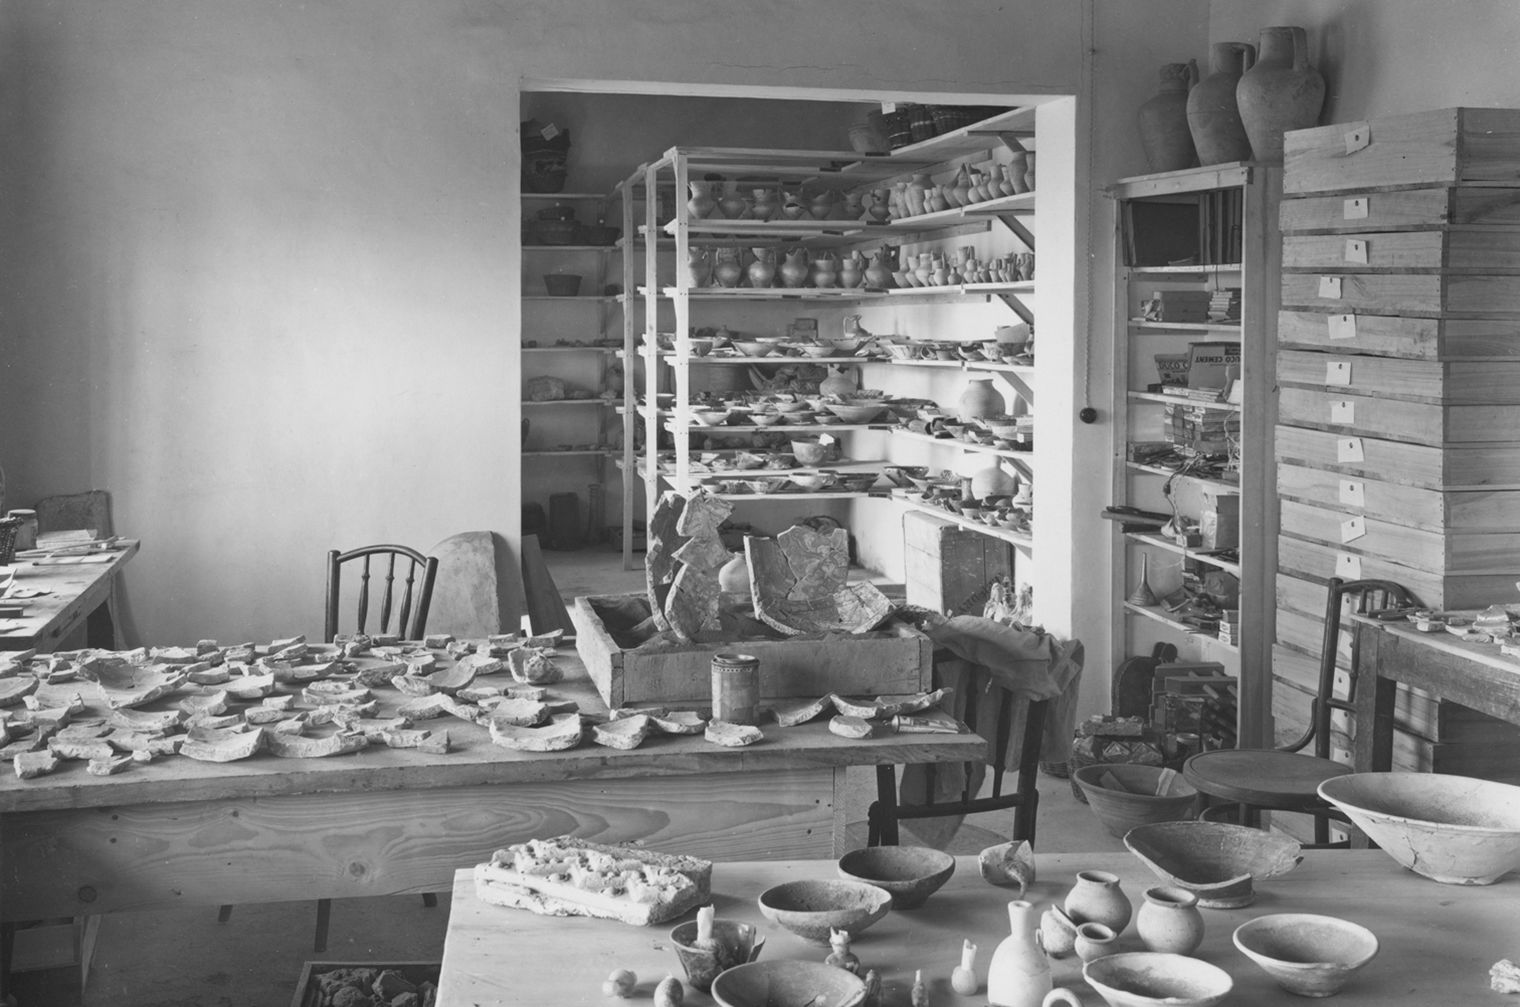 Black and white photo with tables in the foreground and wall shelves in the background with scattered ceramics and ceramic fragments